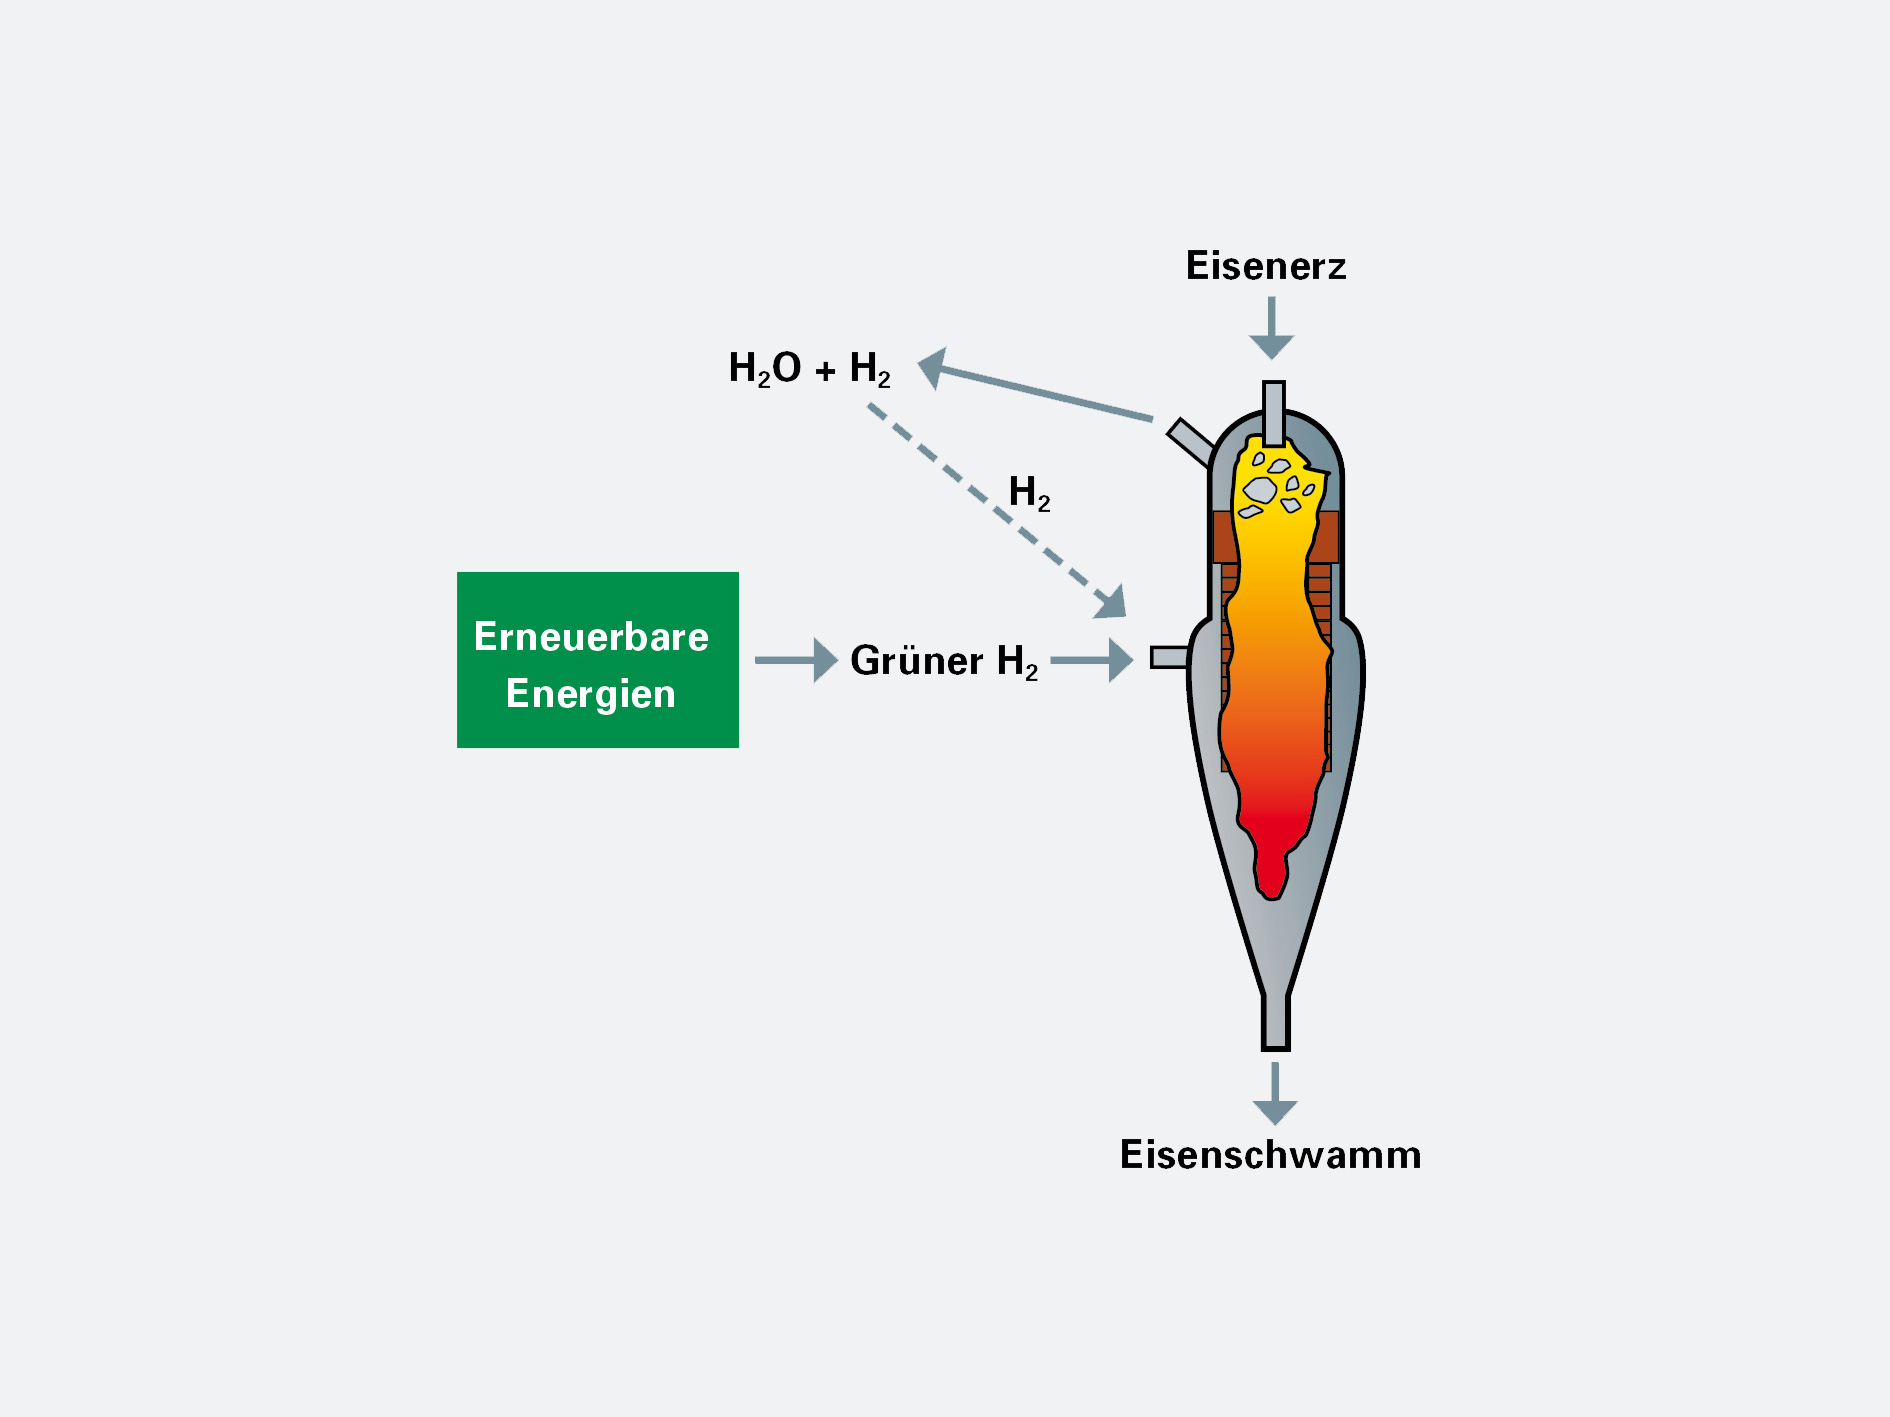 A schematic illustration shows how iron ore becomes sponge iron through the use of water and green hydrogen